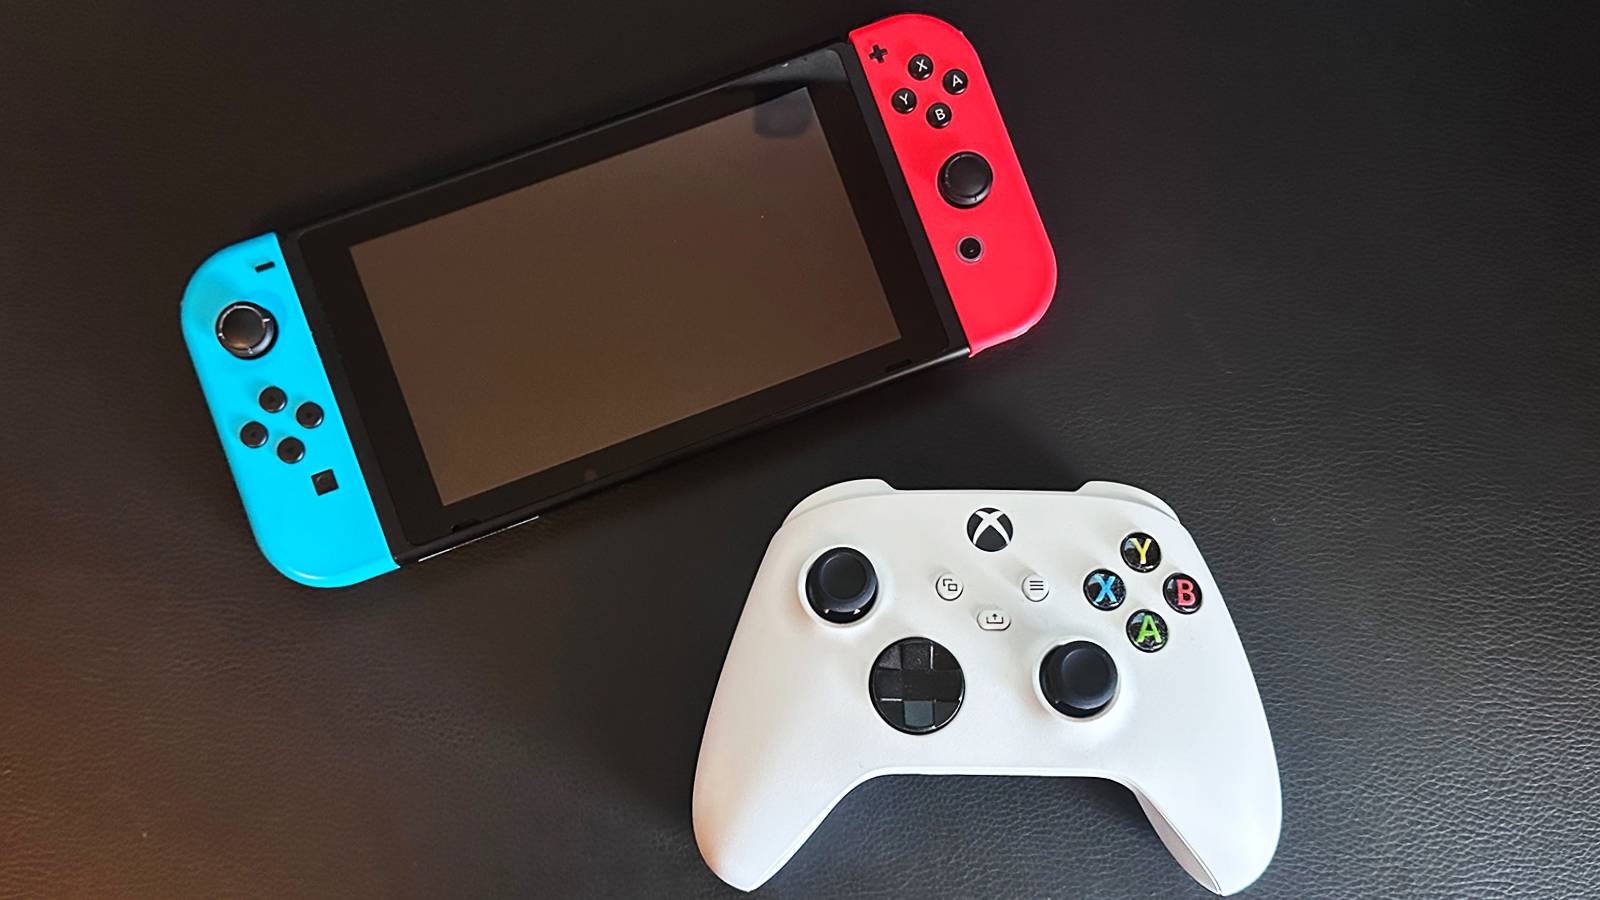 Image of a Nintendo Switch and an official Xbox controller.